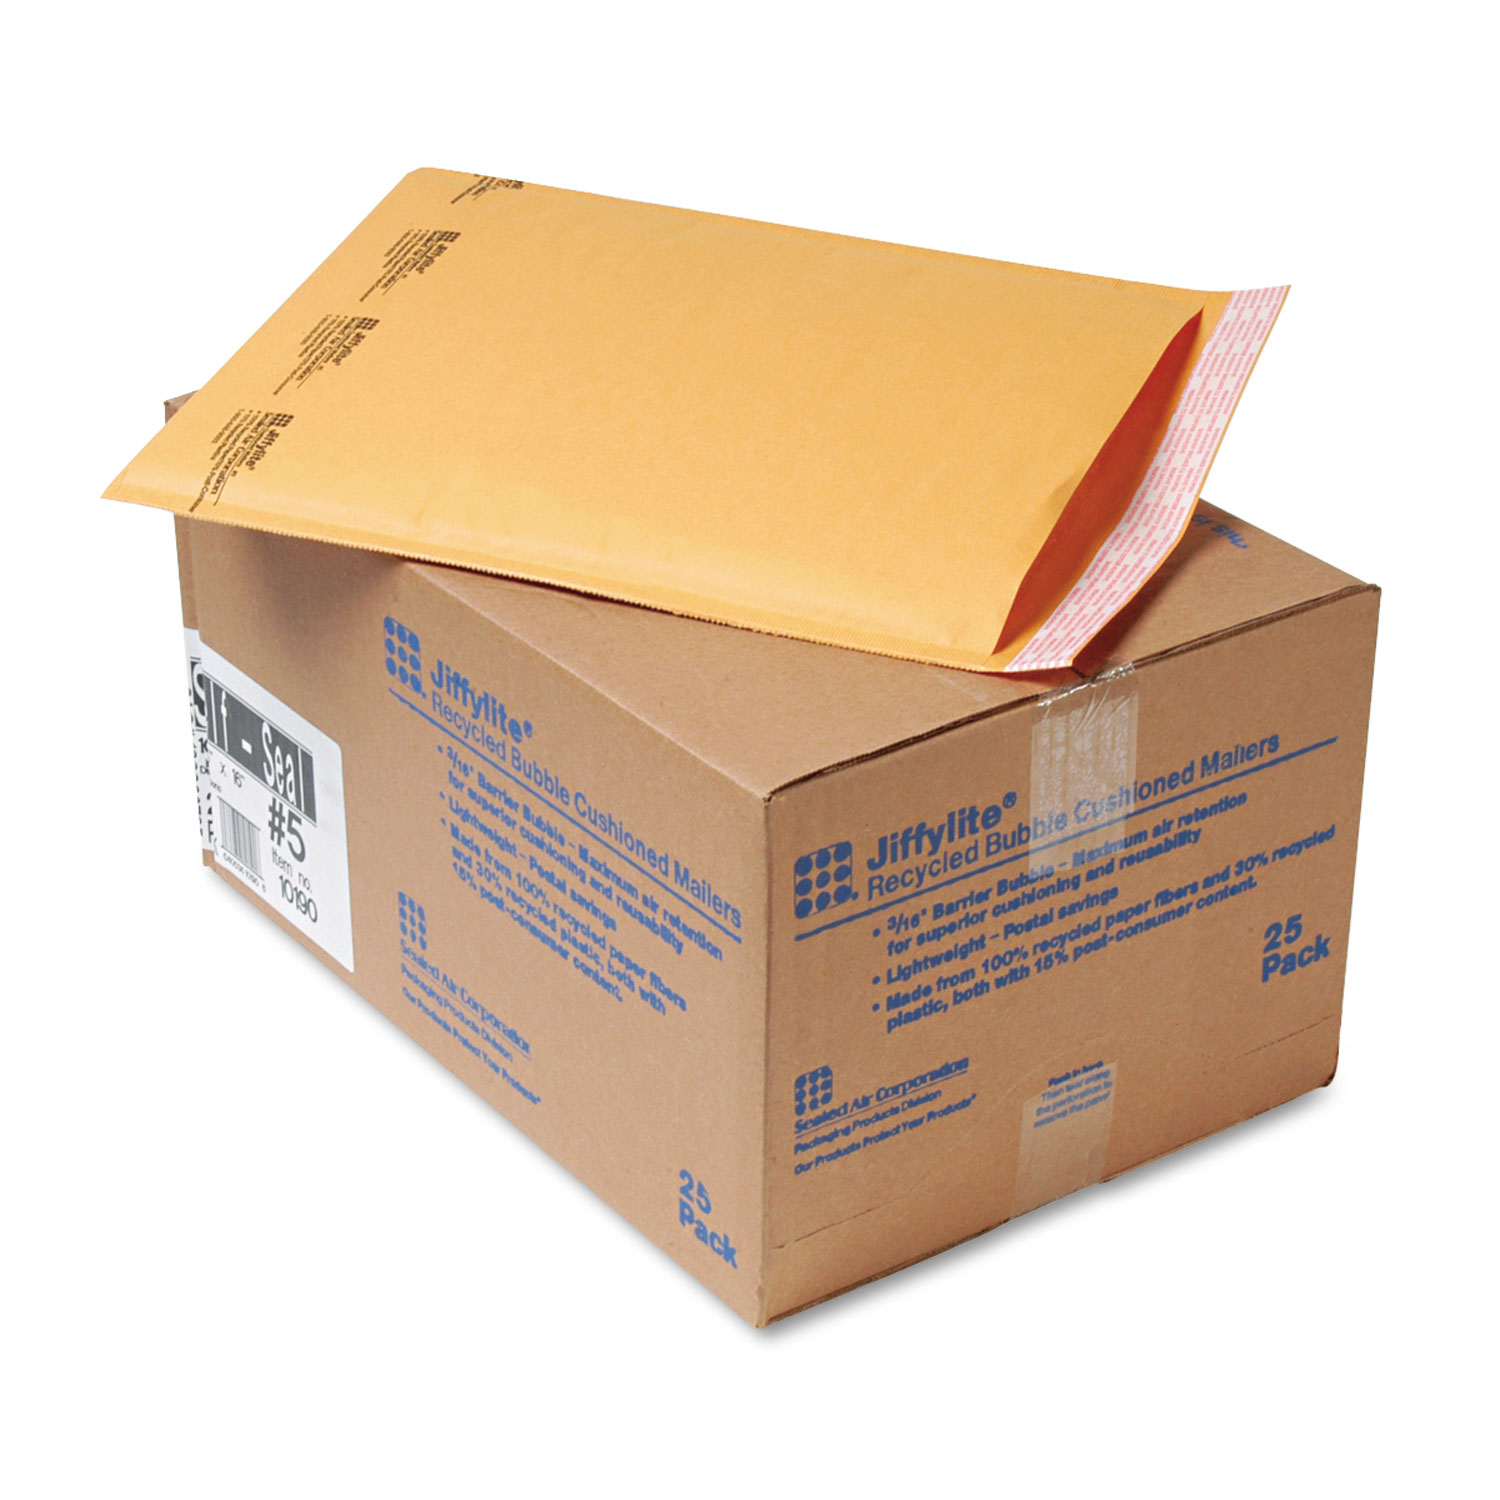  Sealed Air 10190 Jiffylite Self-Seal Bubble Mailer, #5, Barrier Bubble Lining, Self-Adhesive Closure, 10.5 x 16, Golden Brown Kraft, 25/Carton (SEL10190) 